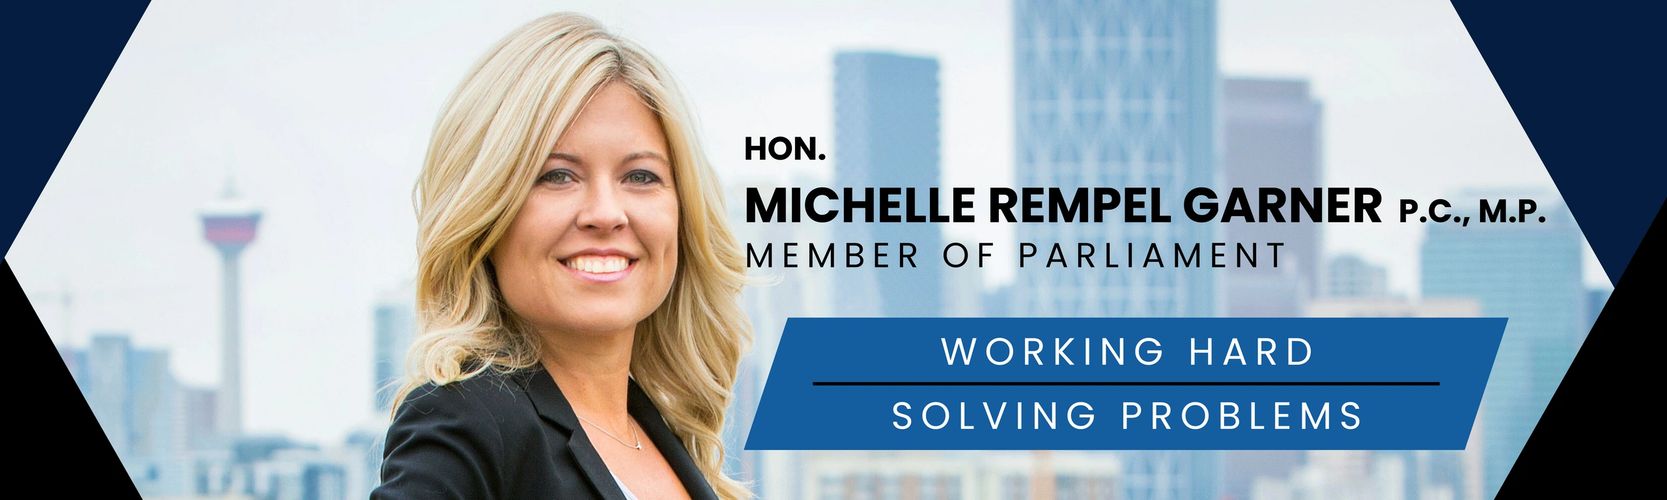 Michelle Rempel Garner - Calgary Member of Parliament. The MP for Calgary Nose Hill.